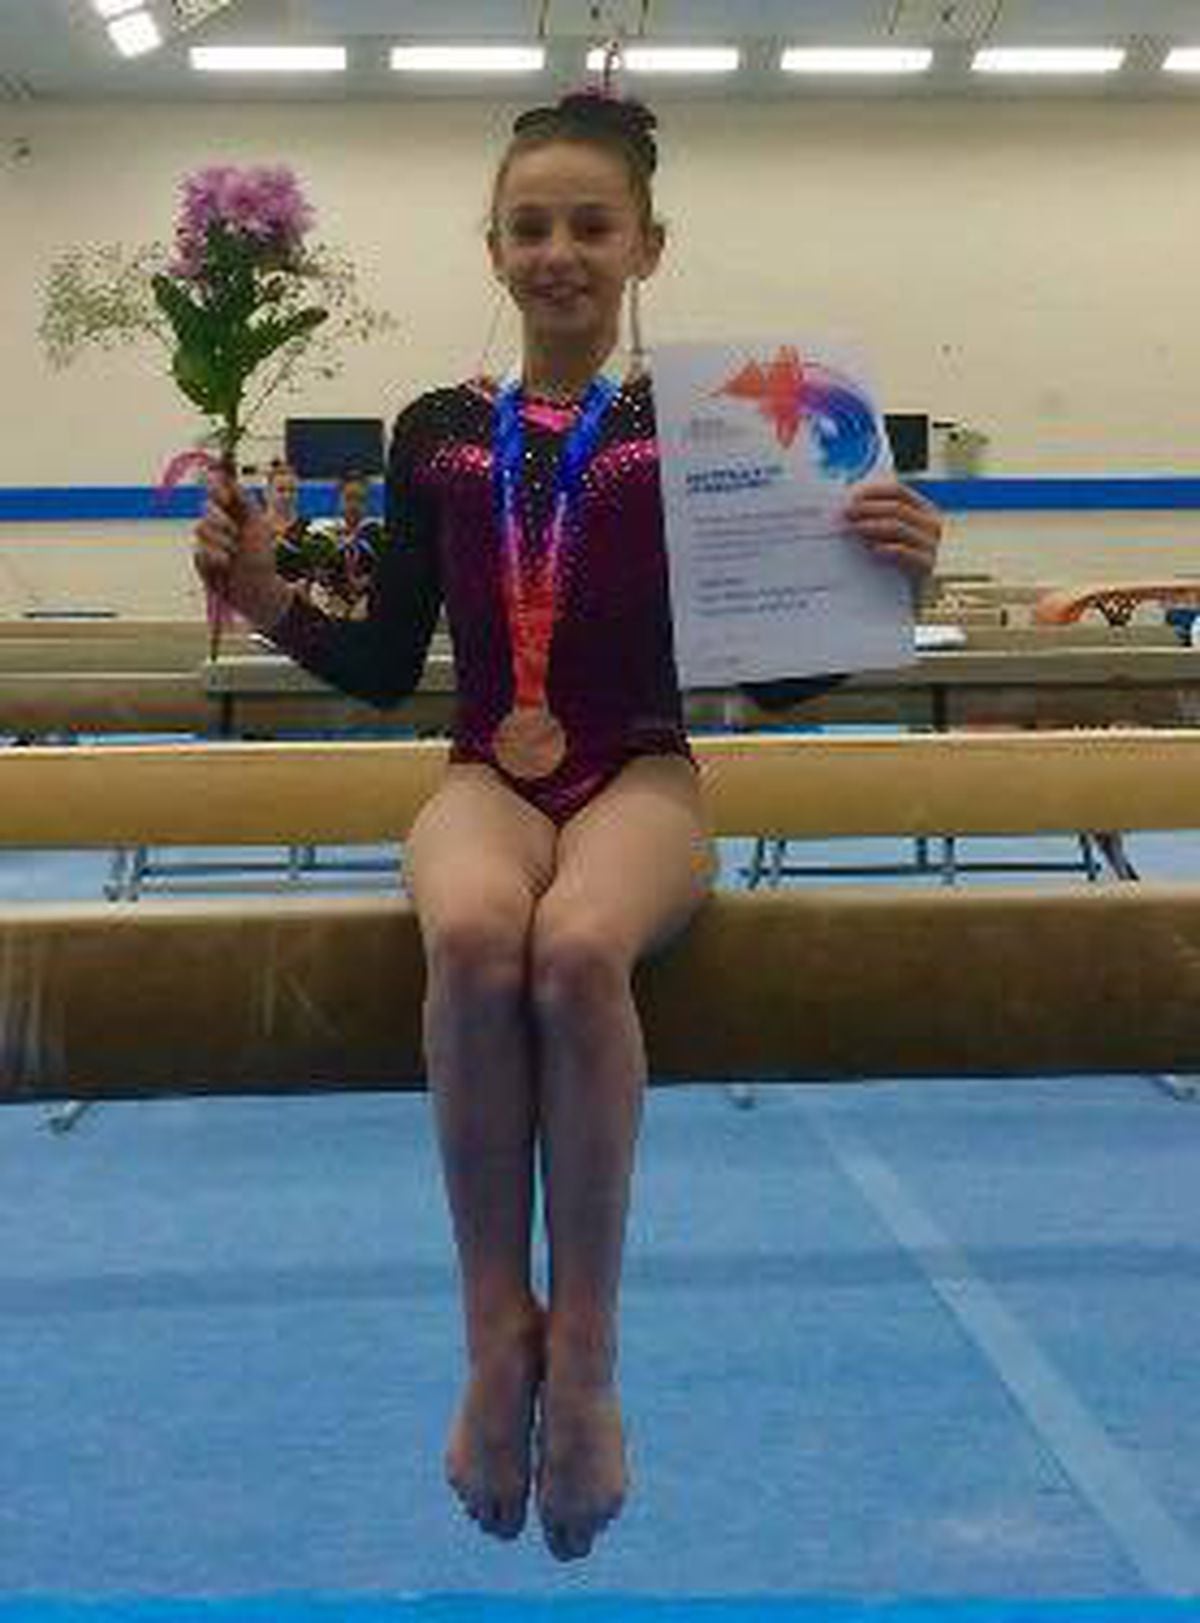 Mia Evans at the British Gymnastics Compulsory 1 competition at Lilleshall National Sports Centre